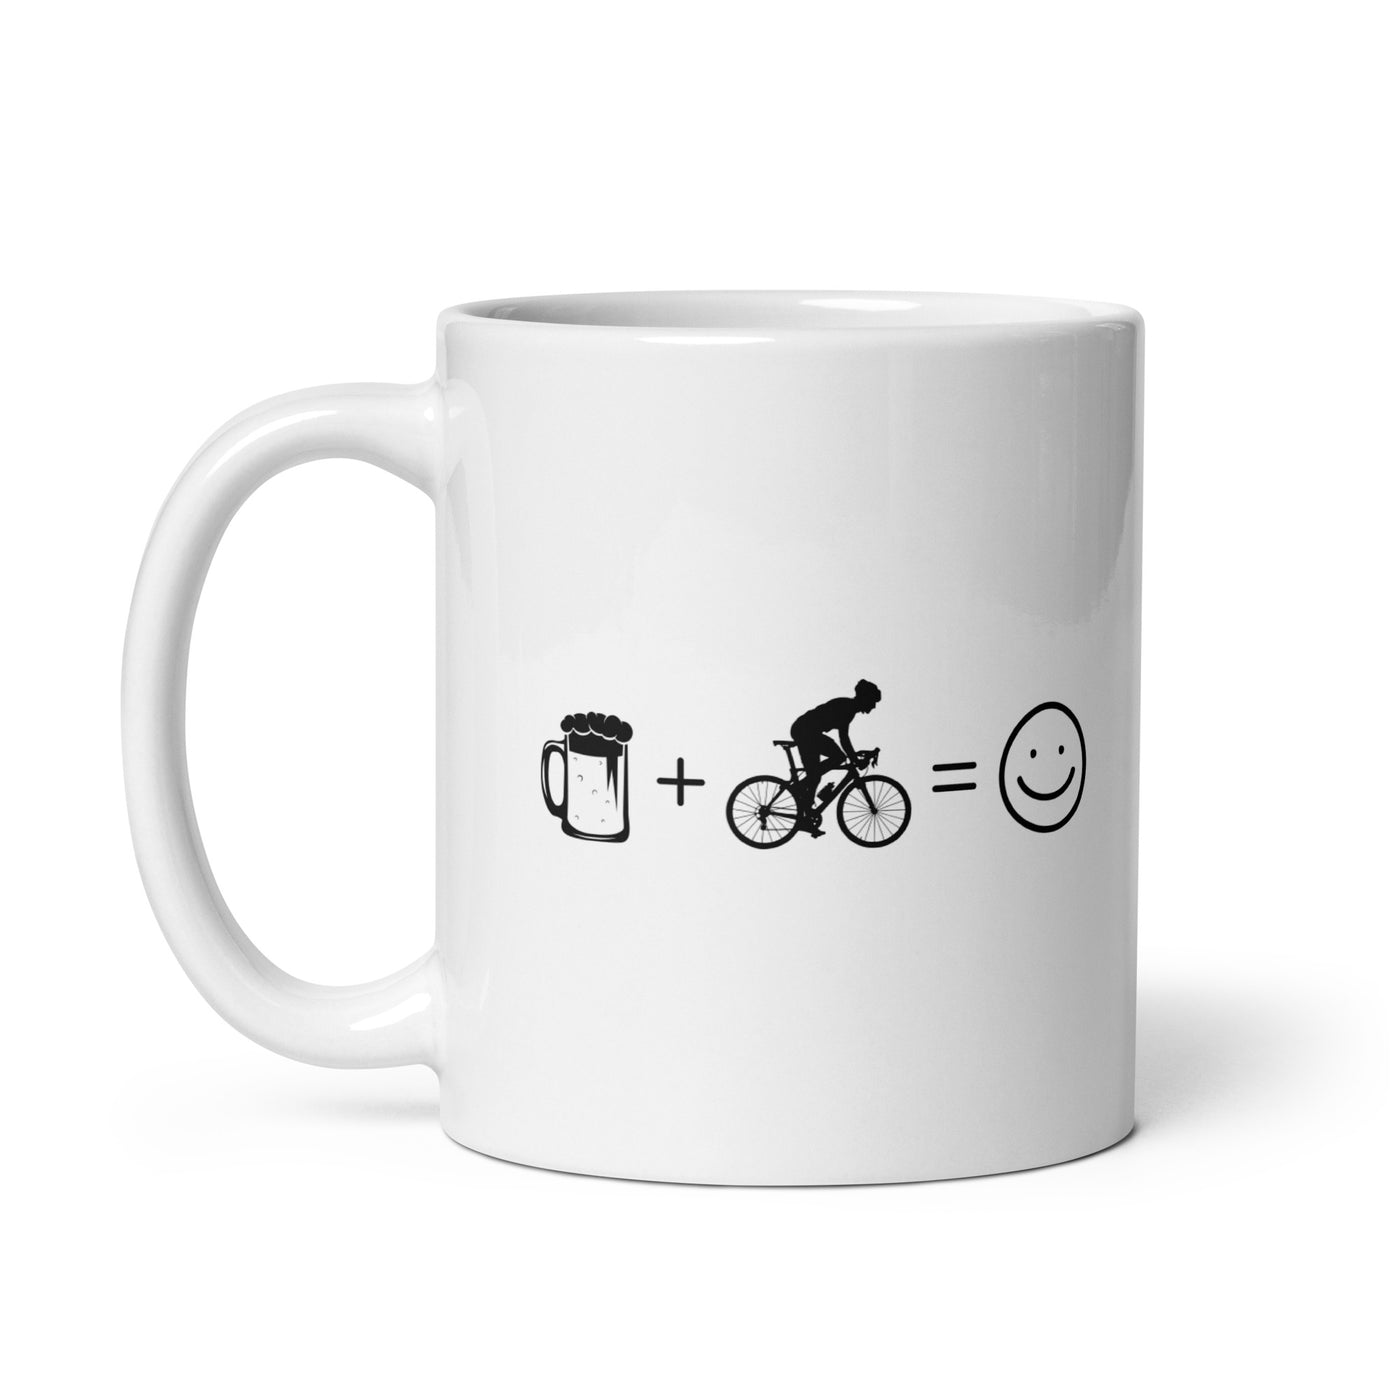 Beer Smile Face And Cycling 1 - Tasse fahrrad 11oz